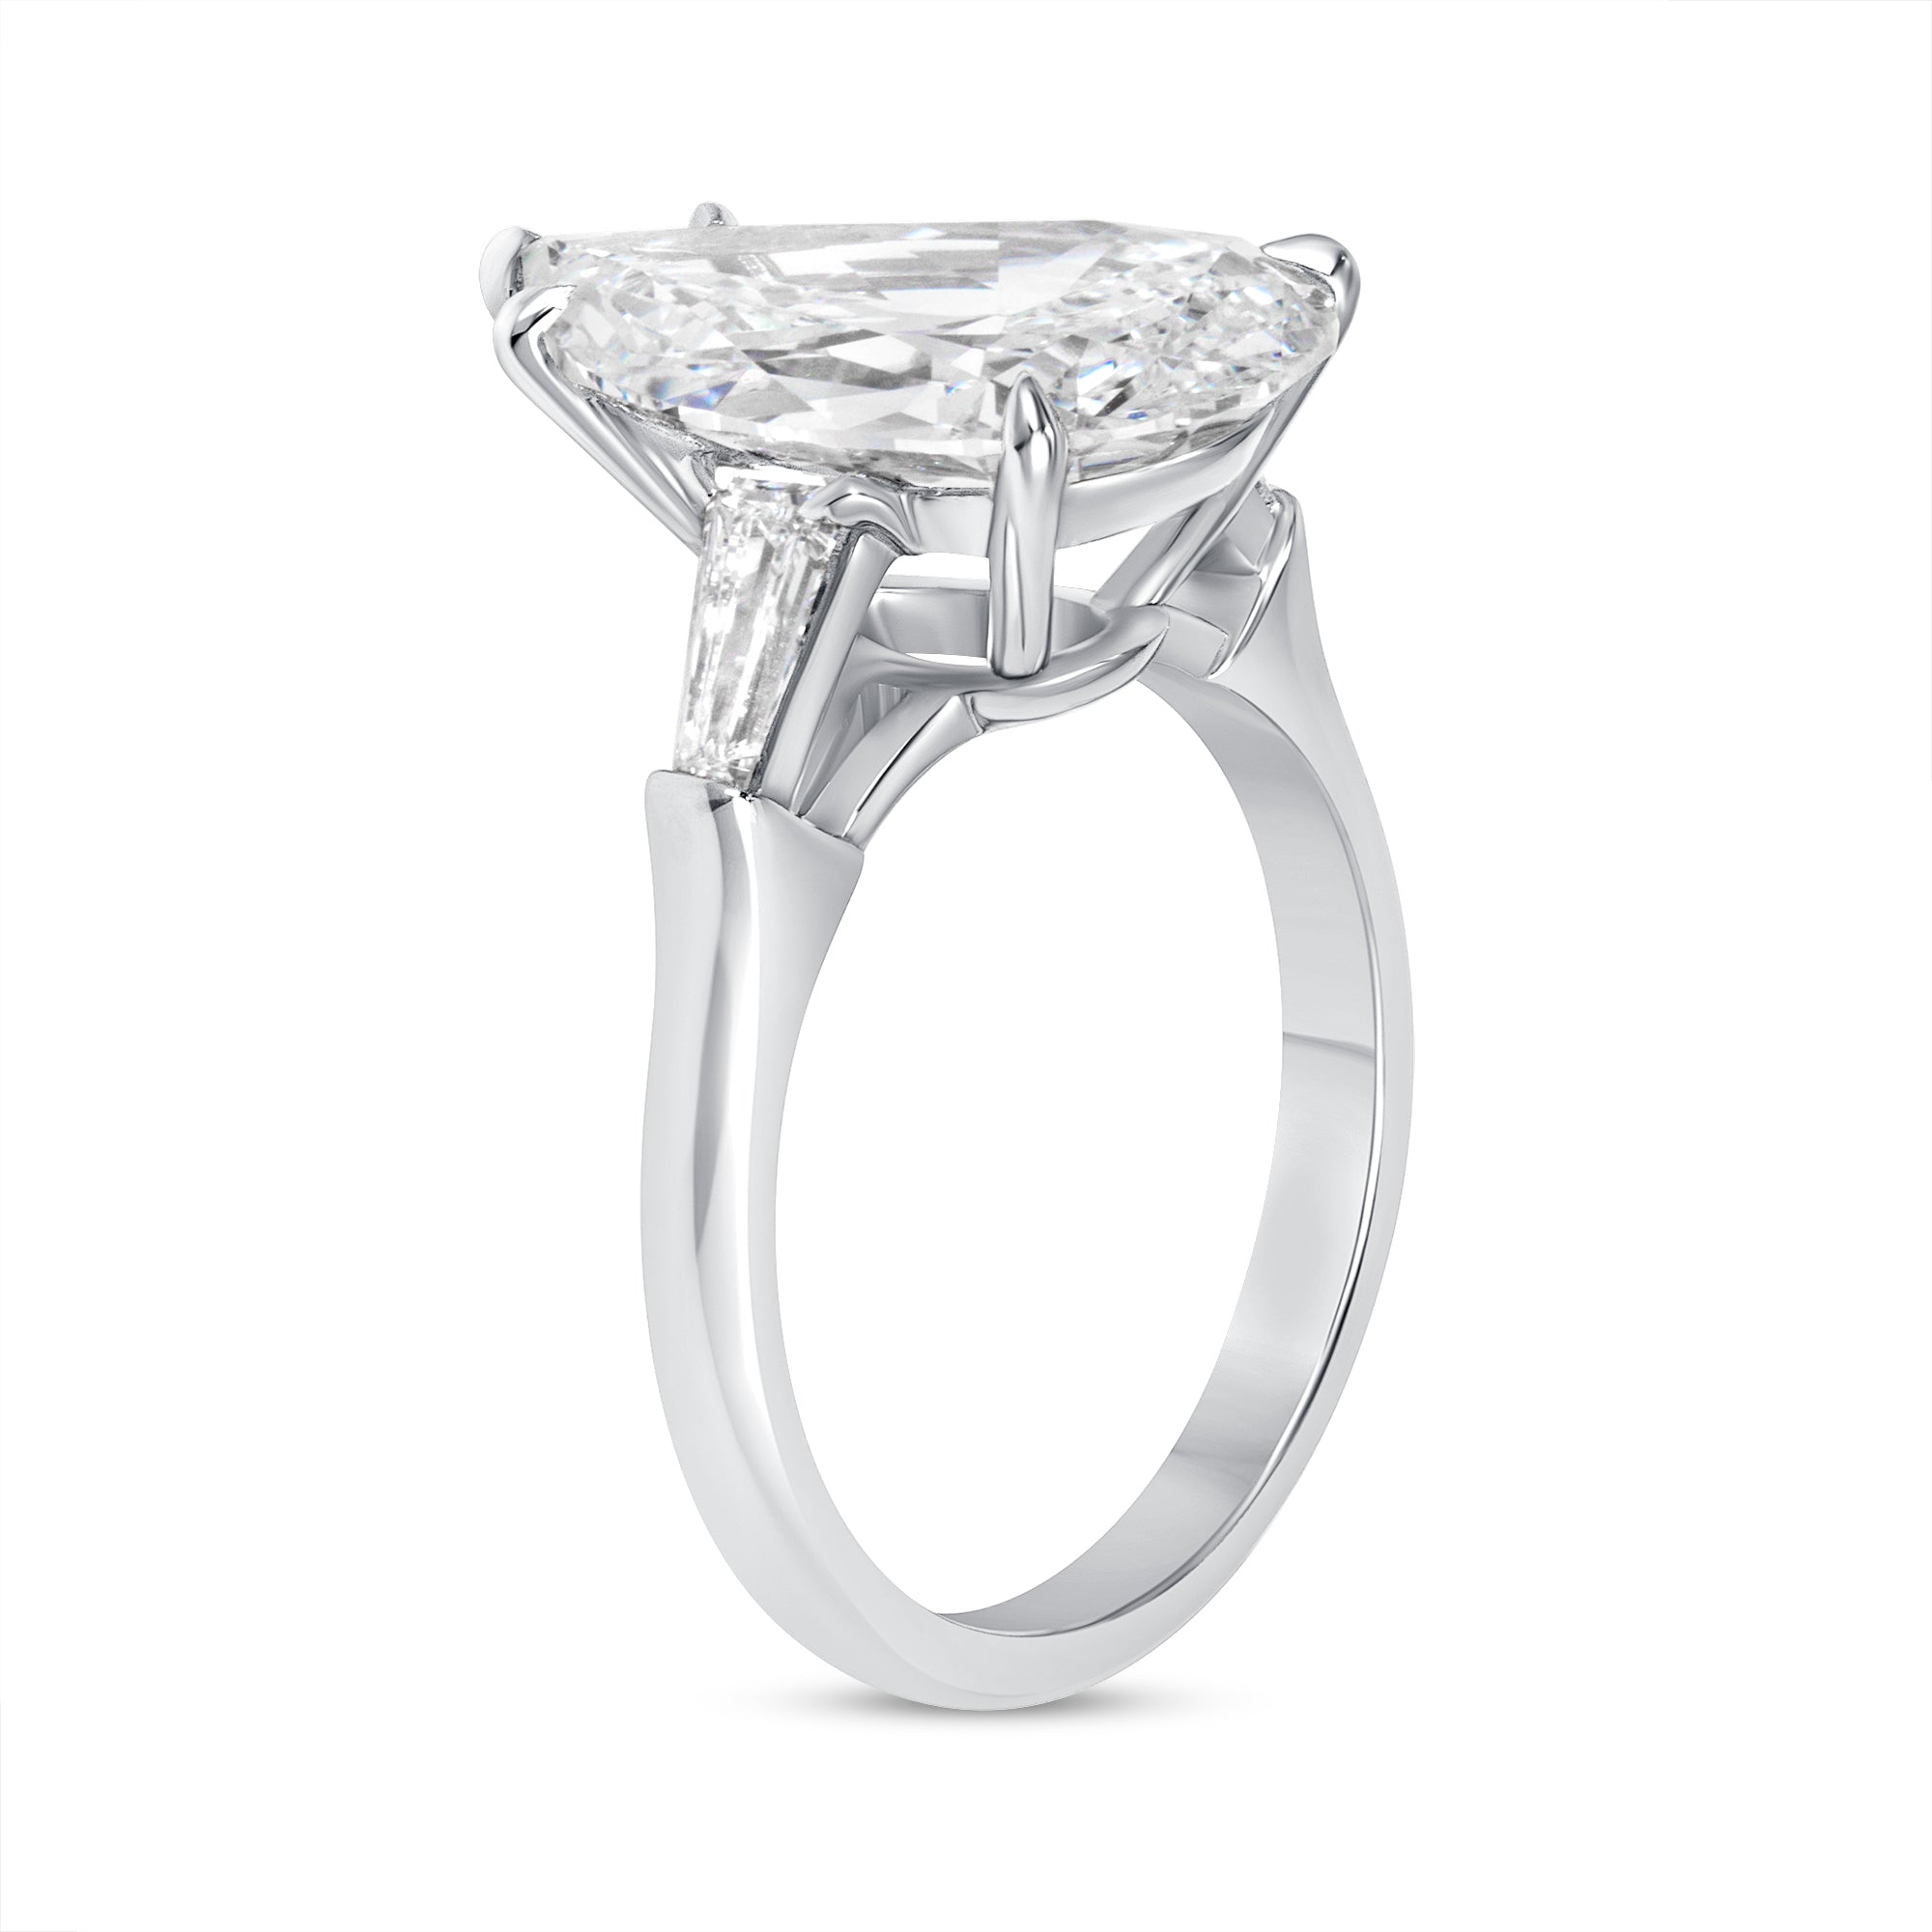 4.94ct Pear Cut Diamond with Tapered Baguette Side Stones in Platinum Band, GIA Certified